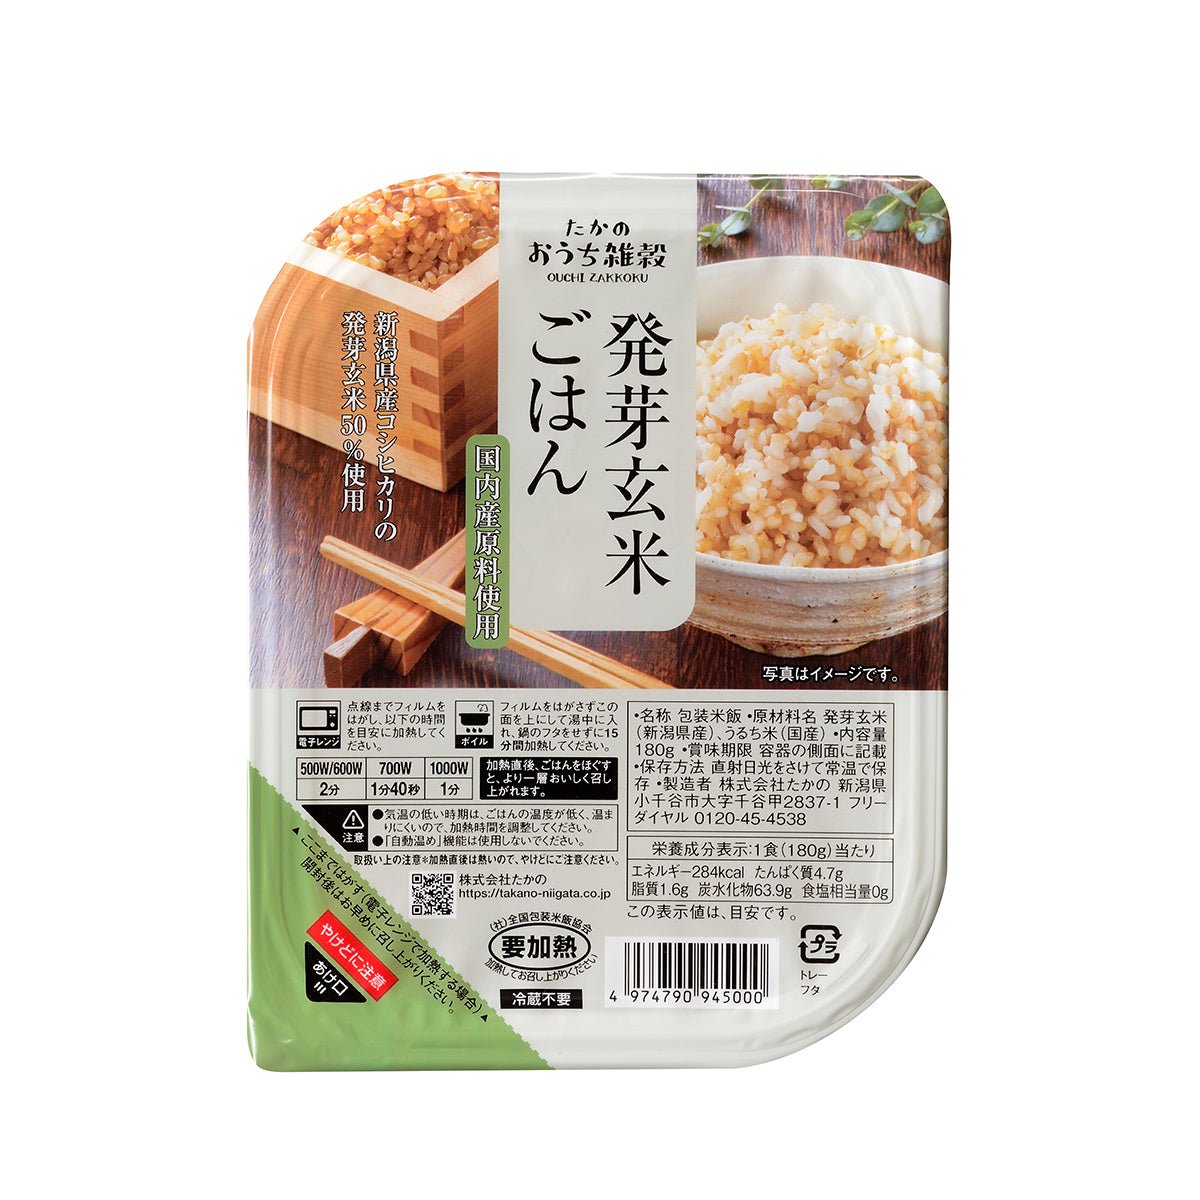 Takano Instant Germinated Brown Rice Pack 180g - Tokyo Fresh Direct